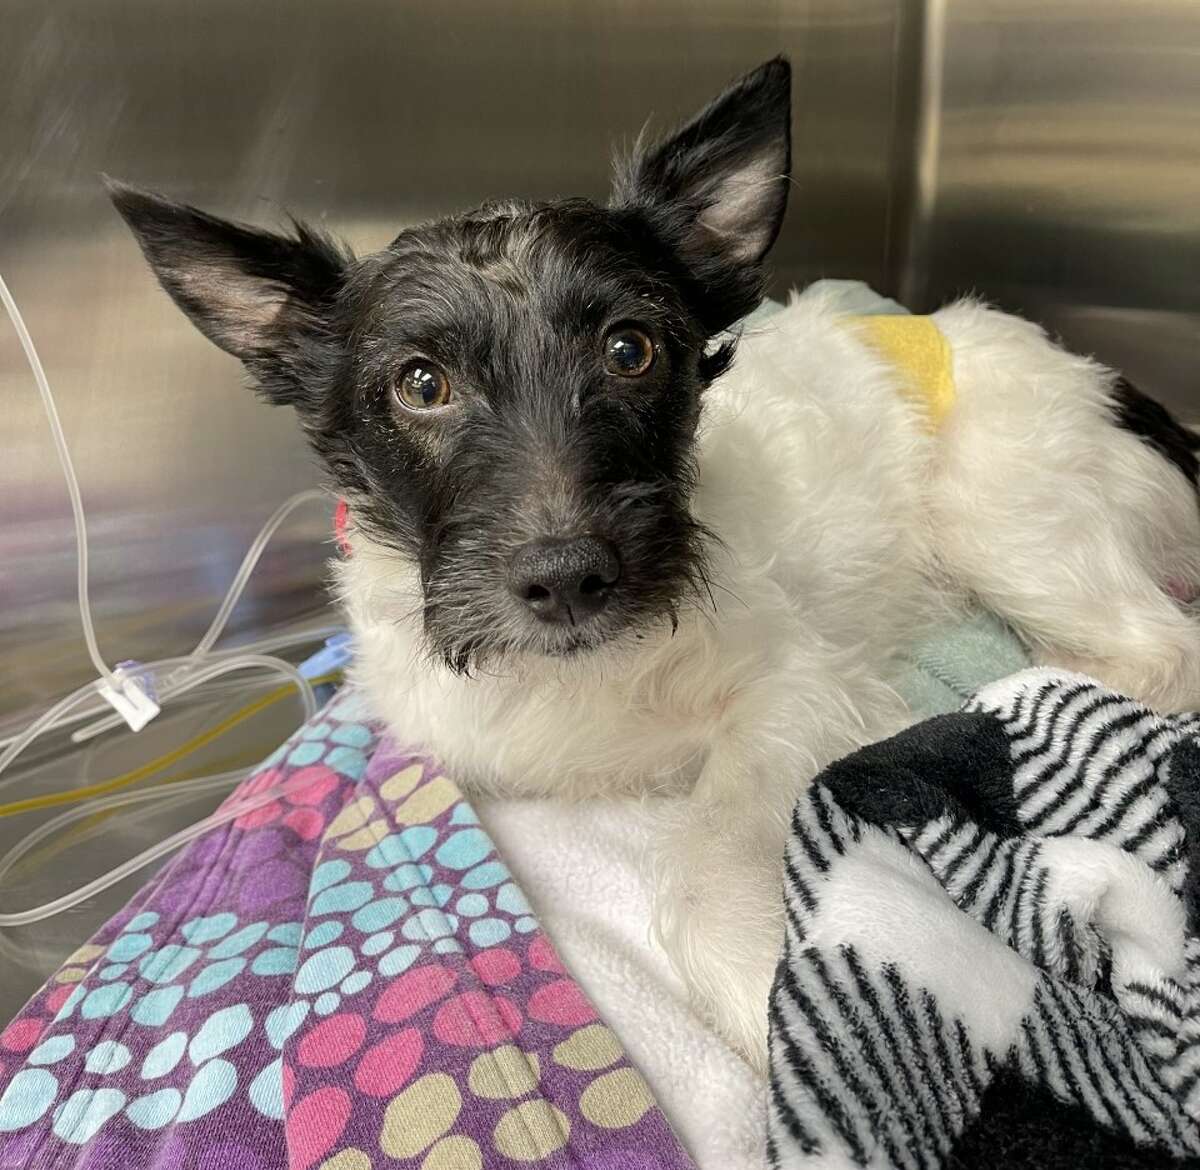 Pictured is Jack the dog, who was found on Cherry Road in Manistee Feb. 19 after being hit by a car. Jack suffered a broken back, a cracked and fractured leg and air in his chest as a result of the accident.